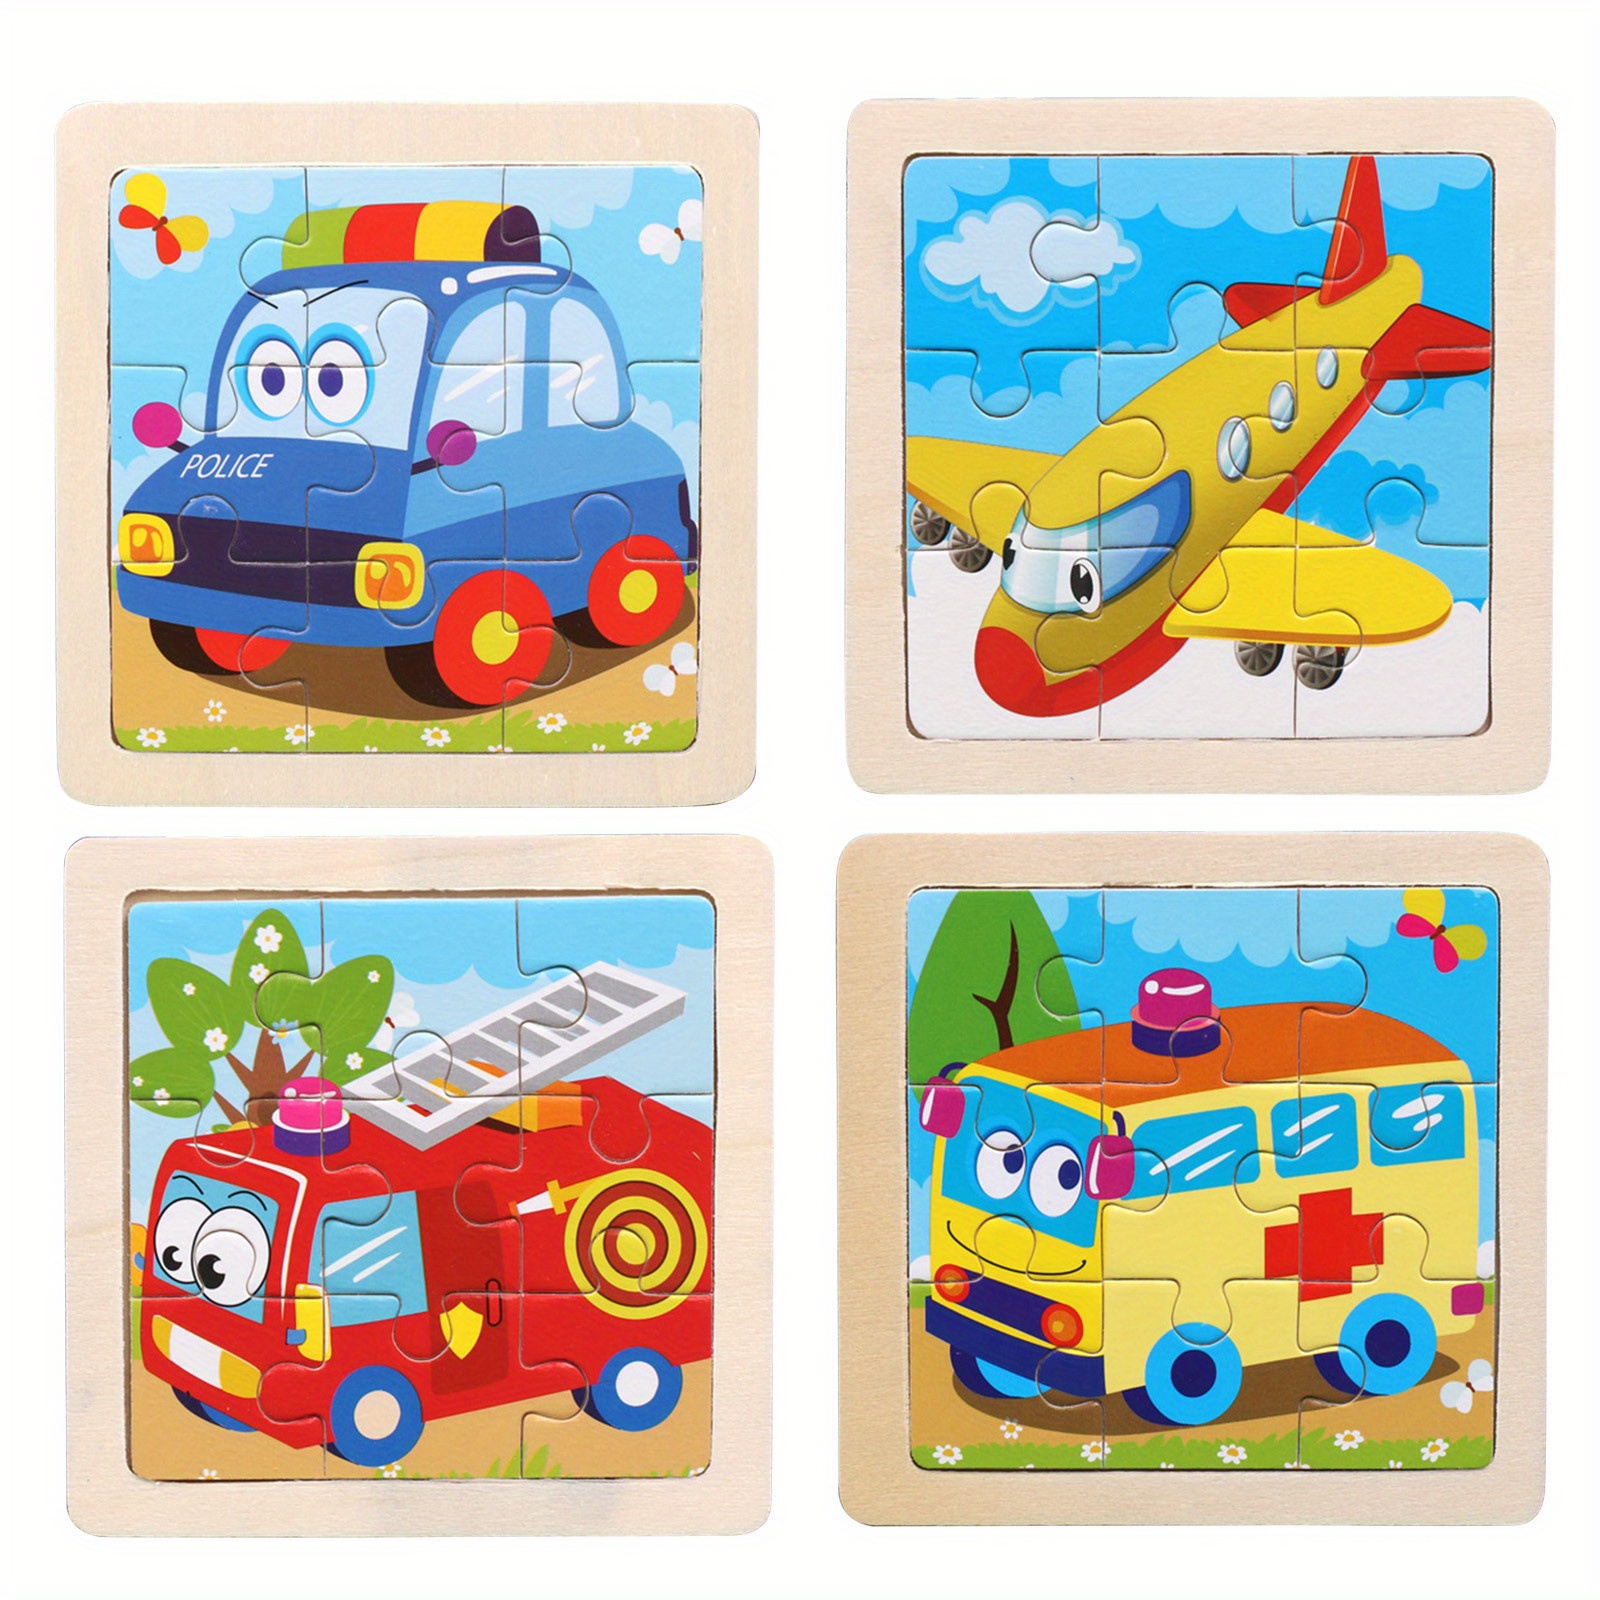 

4 Sets Of Wooden Transportation Themed Puzzles, 9 Pieces Each